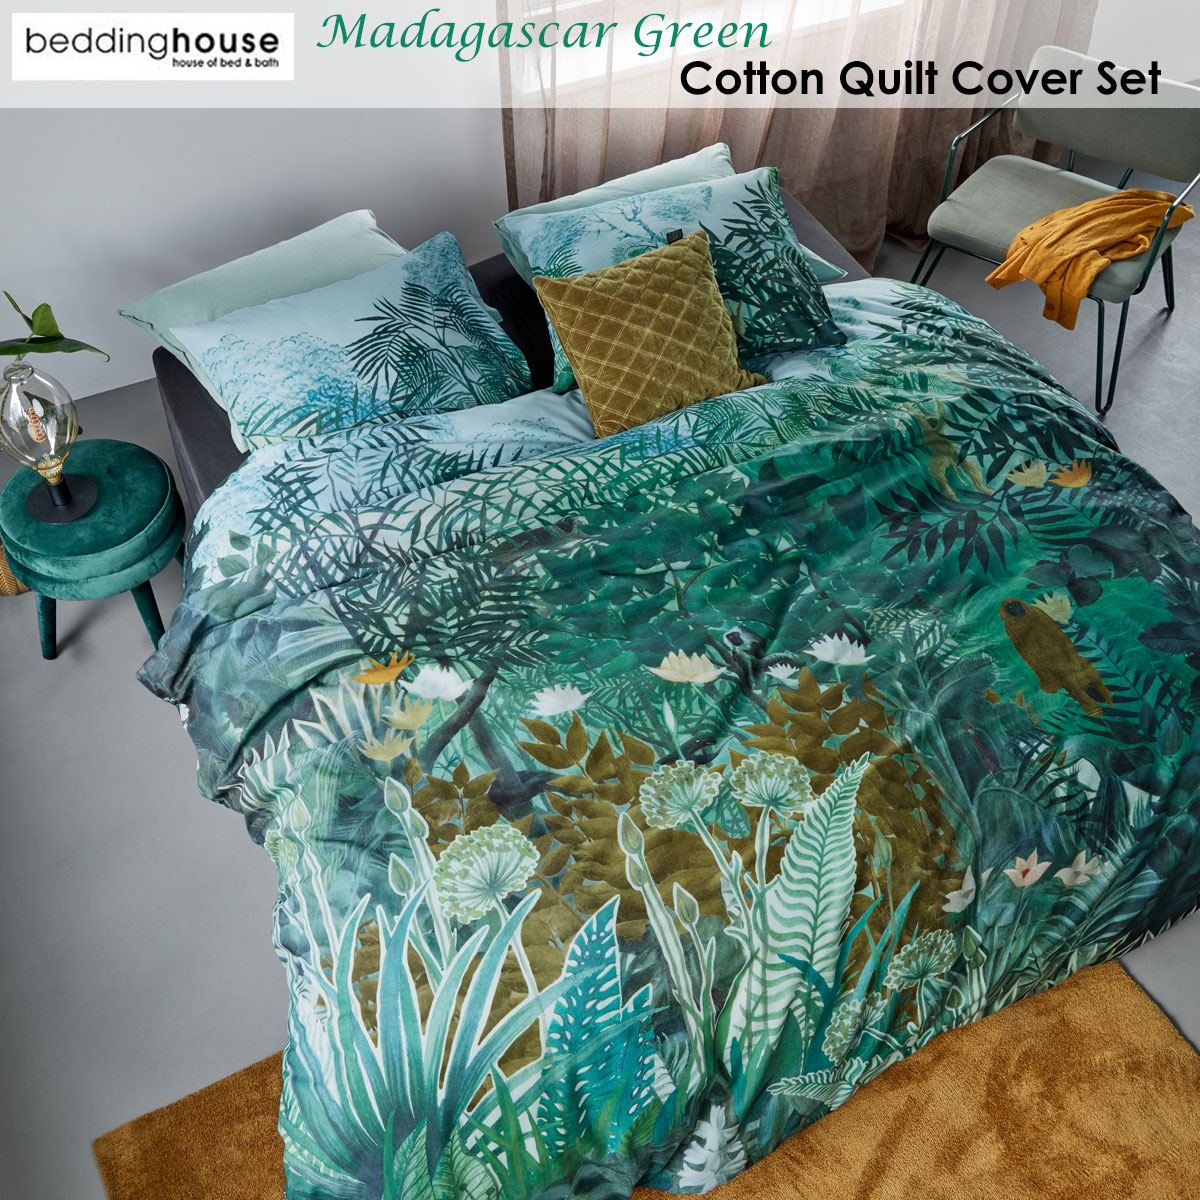 Madagascar Green Cotton Quilt Cover Set by Bedding House